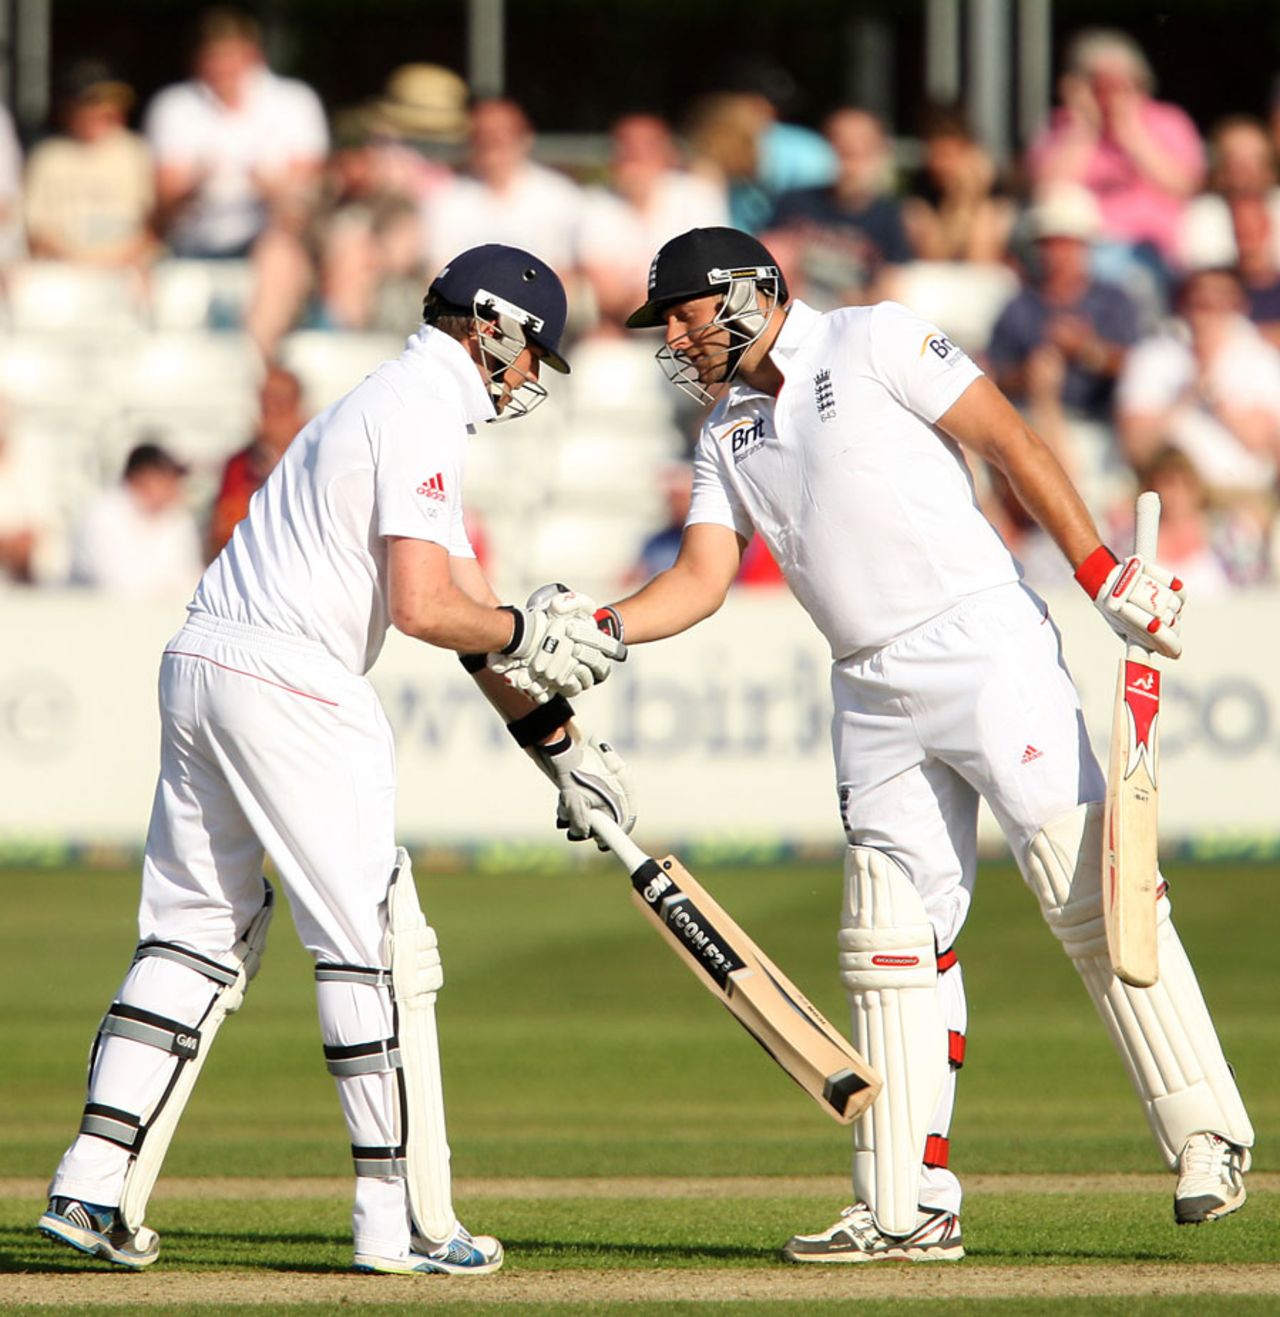 Graeme Swann and Tim Bresnan put on a century stand, Essex v England, 1st day, Chelmsford, June 30, 2013